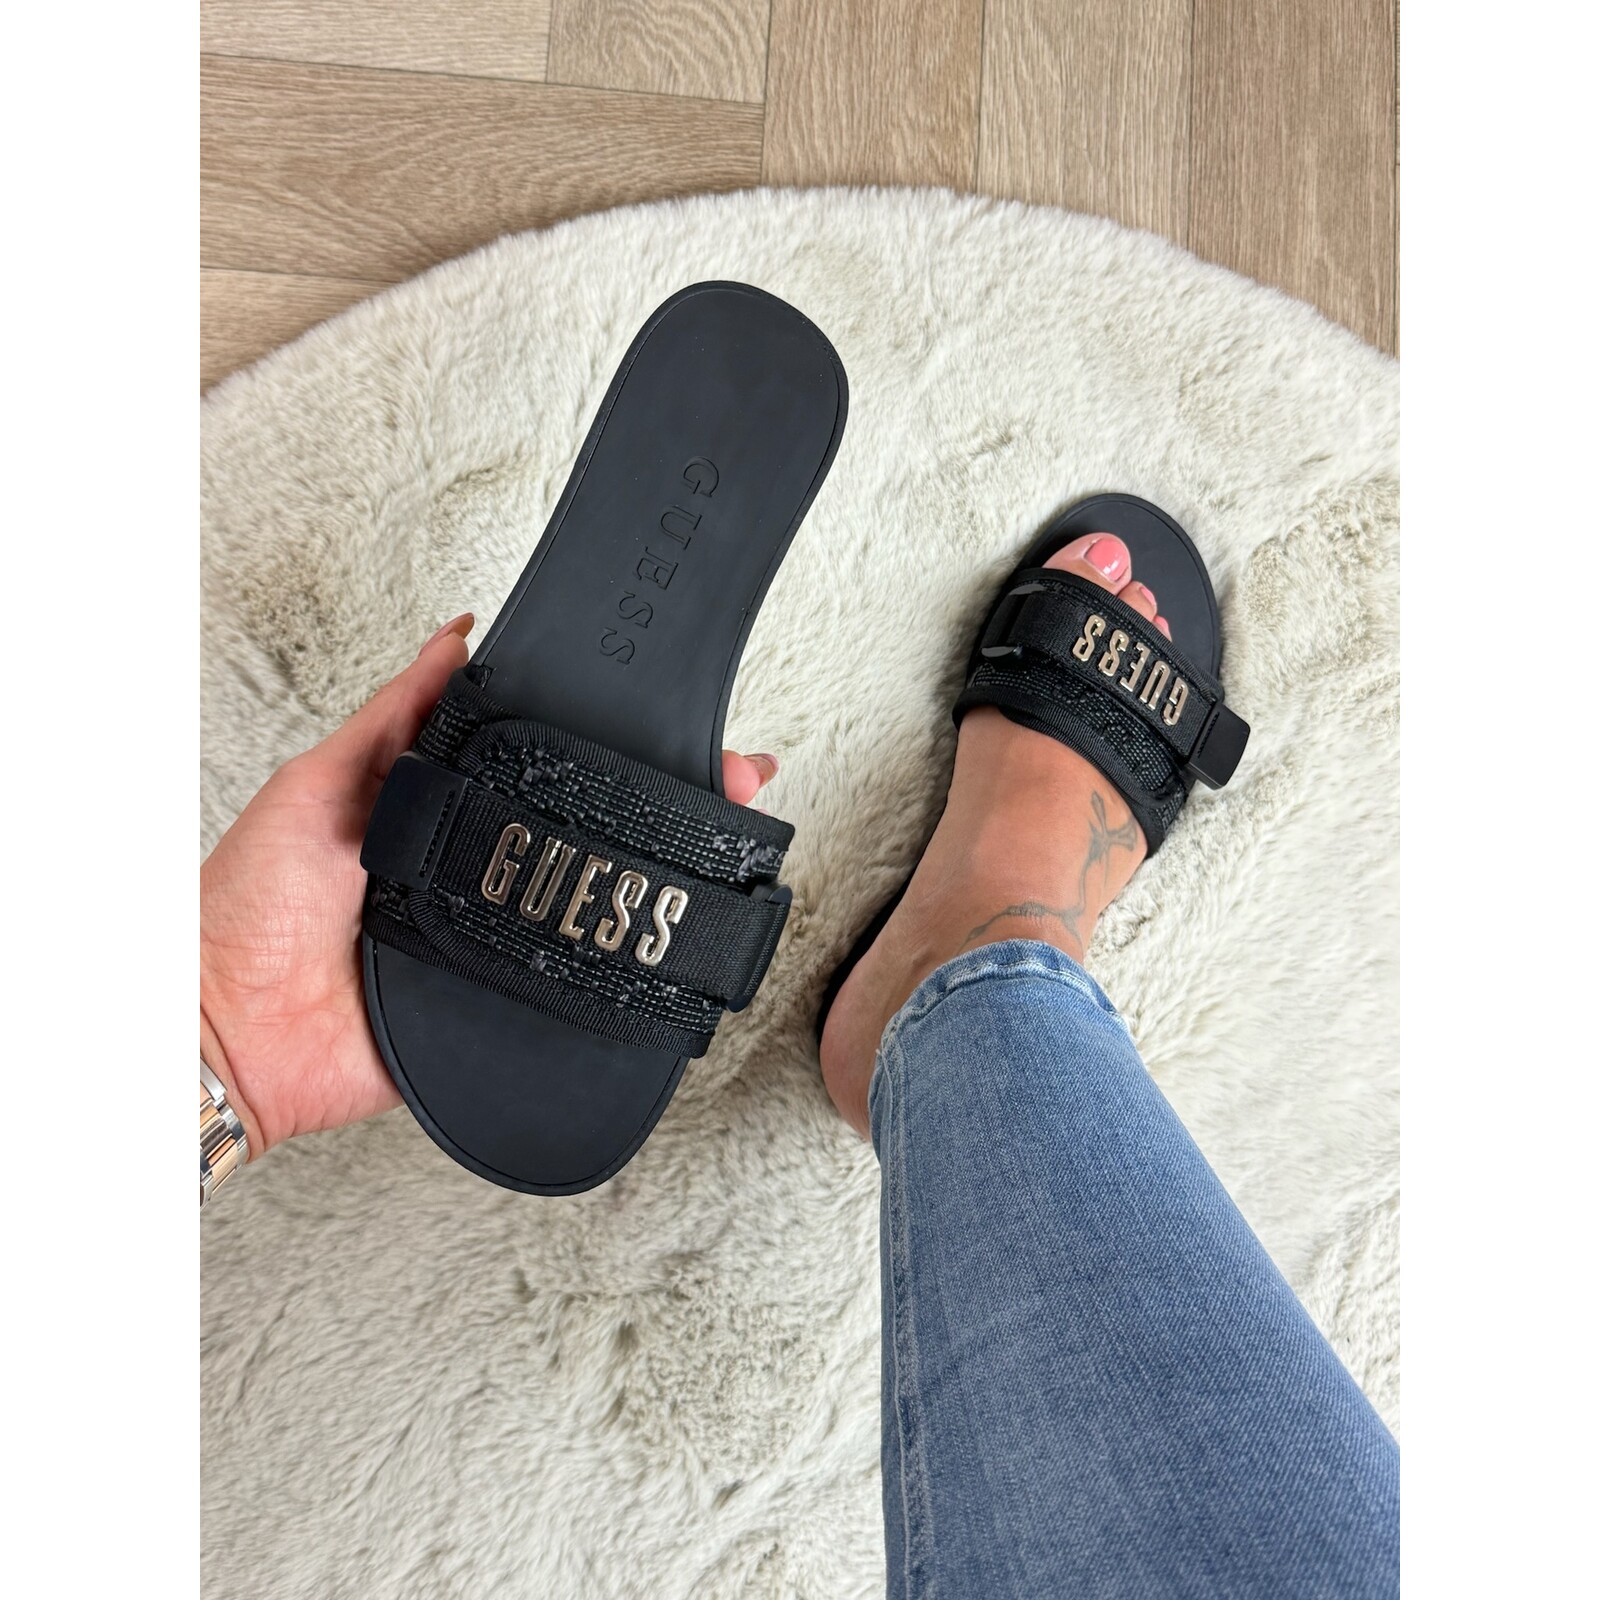 Guess Slippers  Jamie Black  Guess 842